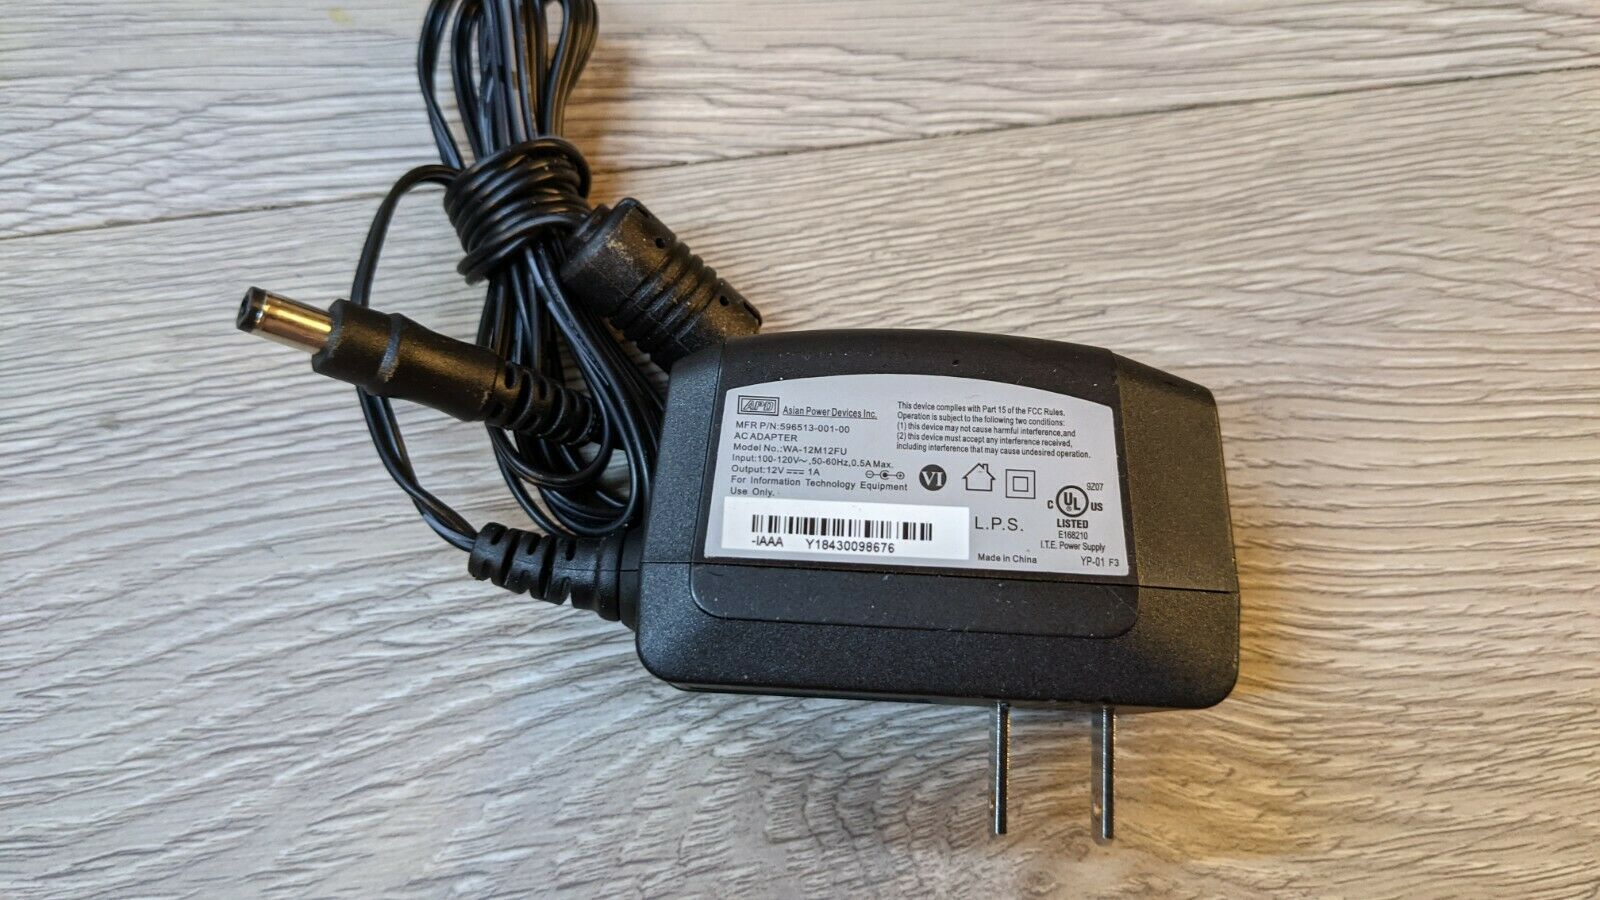 12V Asian Power Devices APD WA-12M12FU AC Adapter Power Supply Connection Split/Duplication: 1:2 MPN: 596513-004-00 T